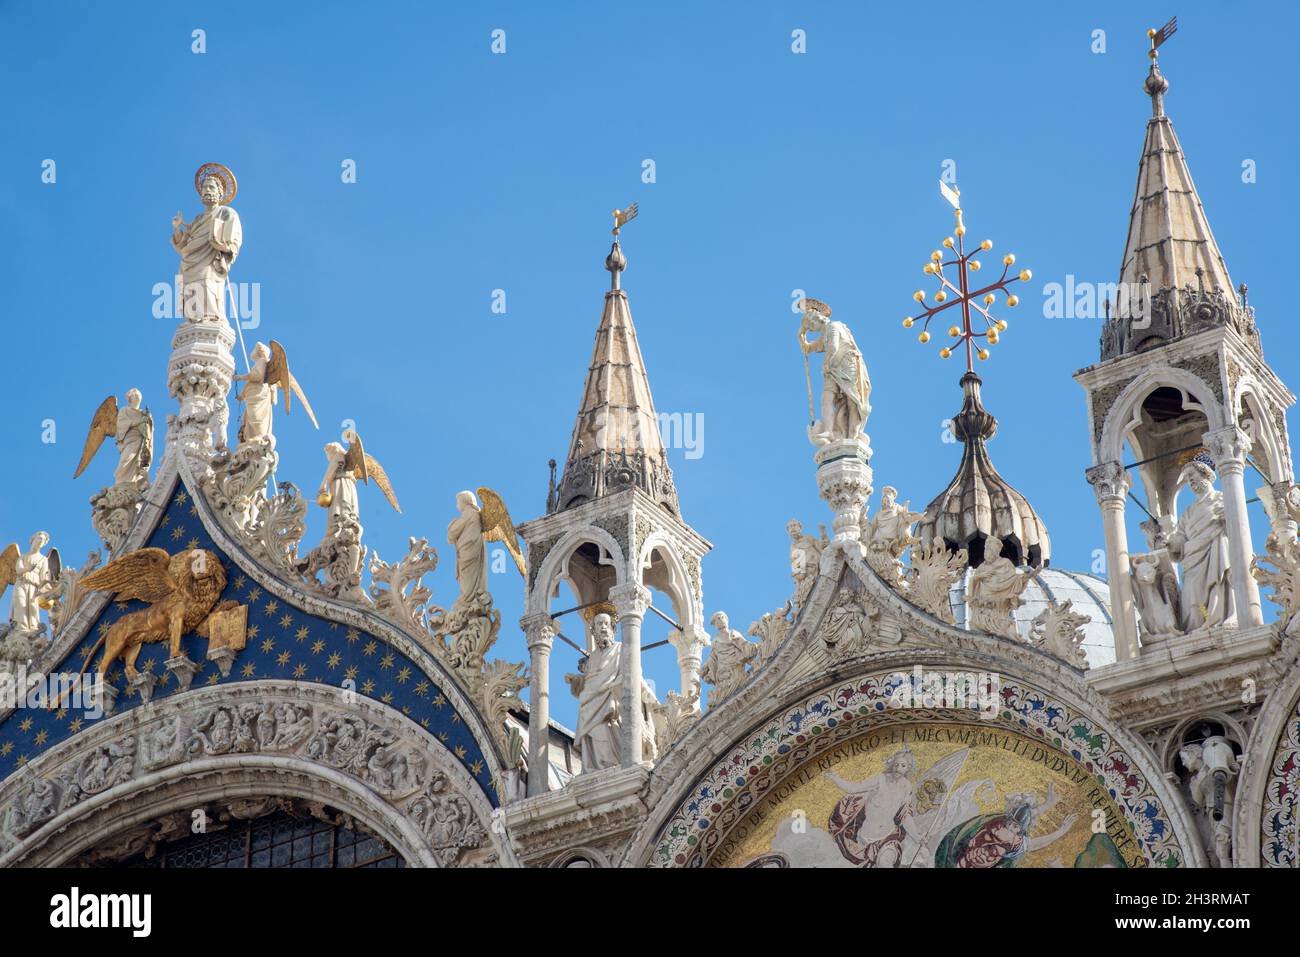 exterior detail of basilica at San Marco square in Venice, Italy Stock Photo